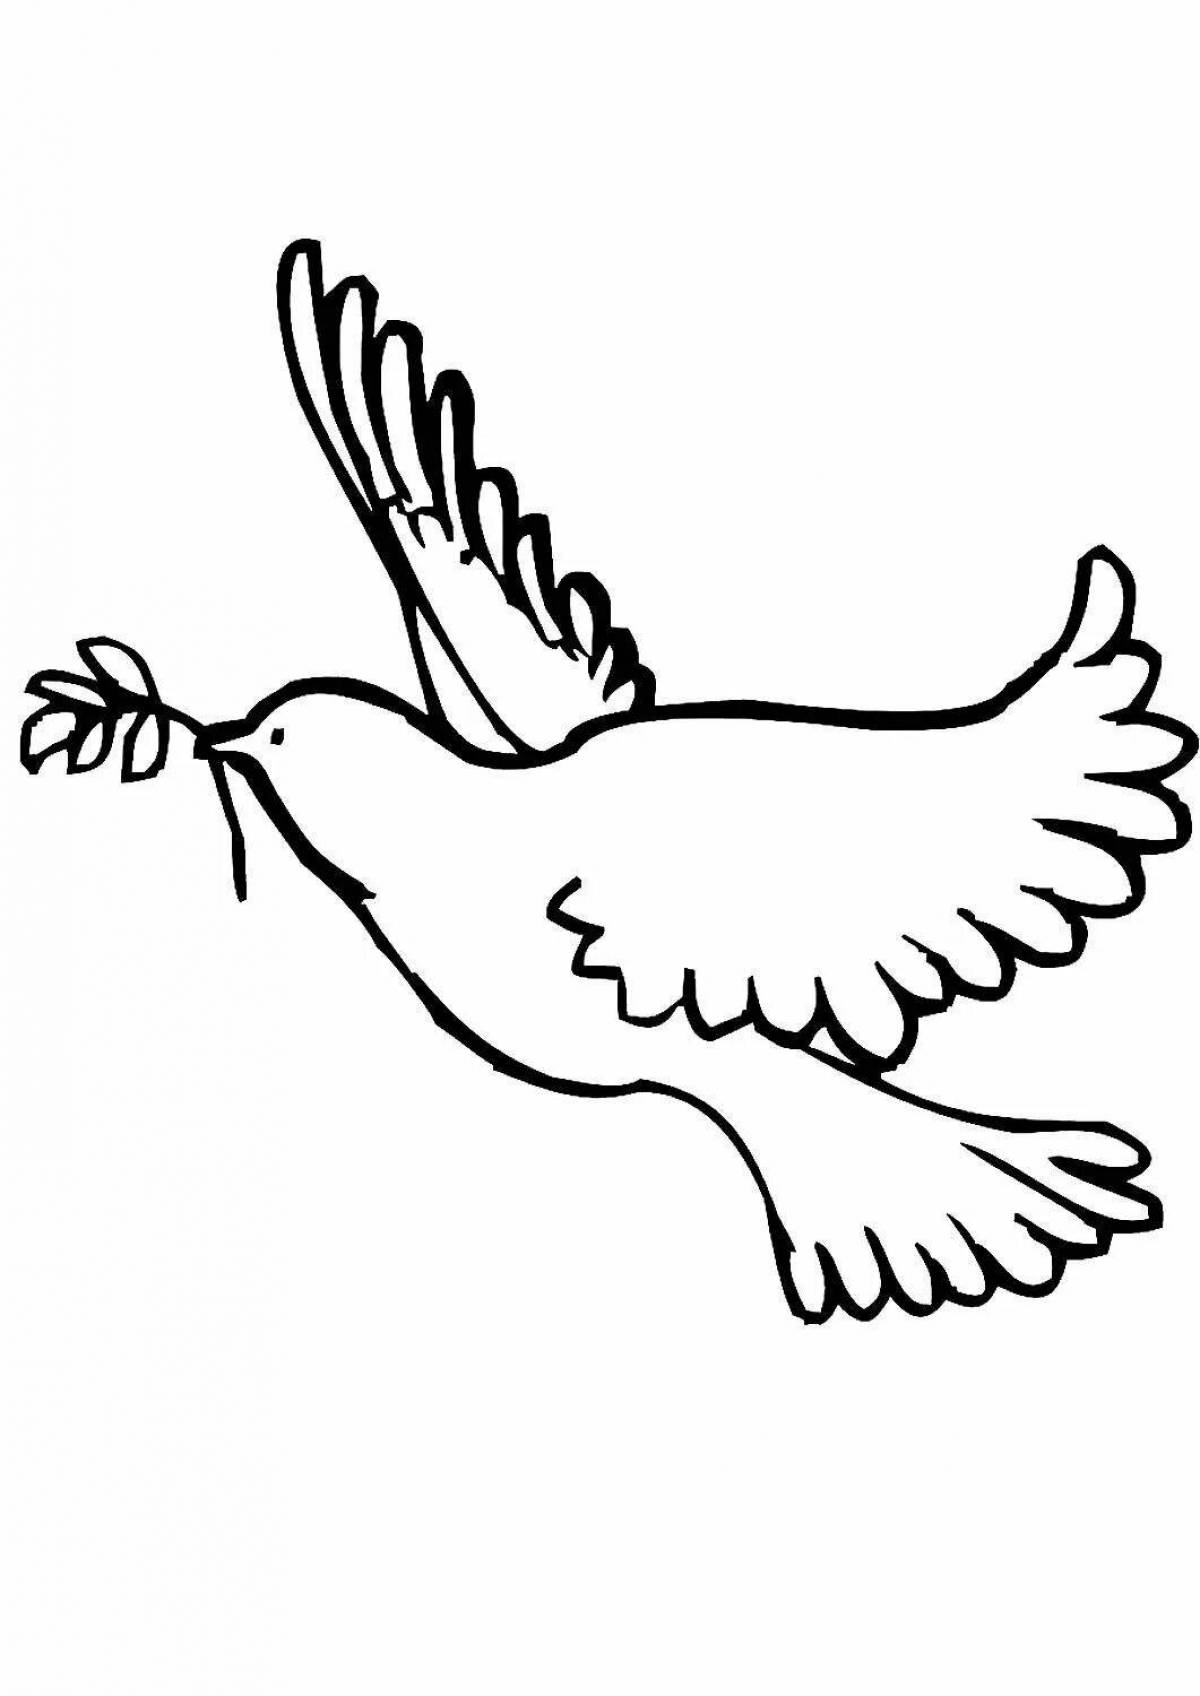 Fantastic peace dove coloring page for kids